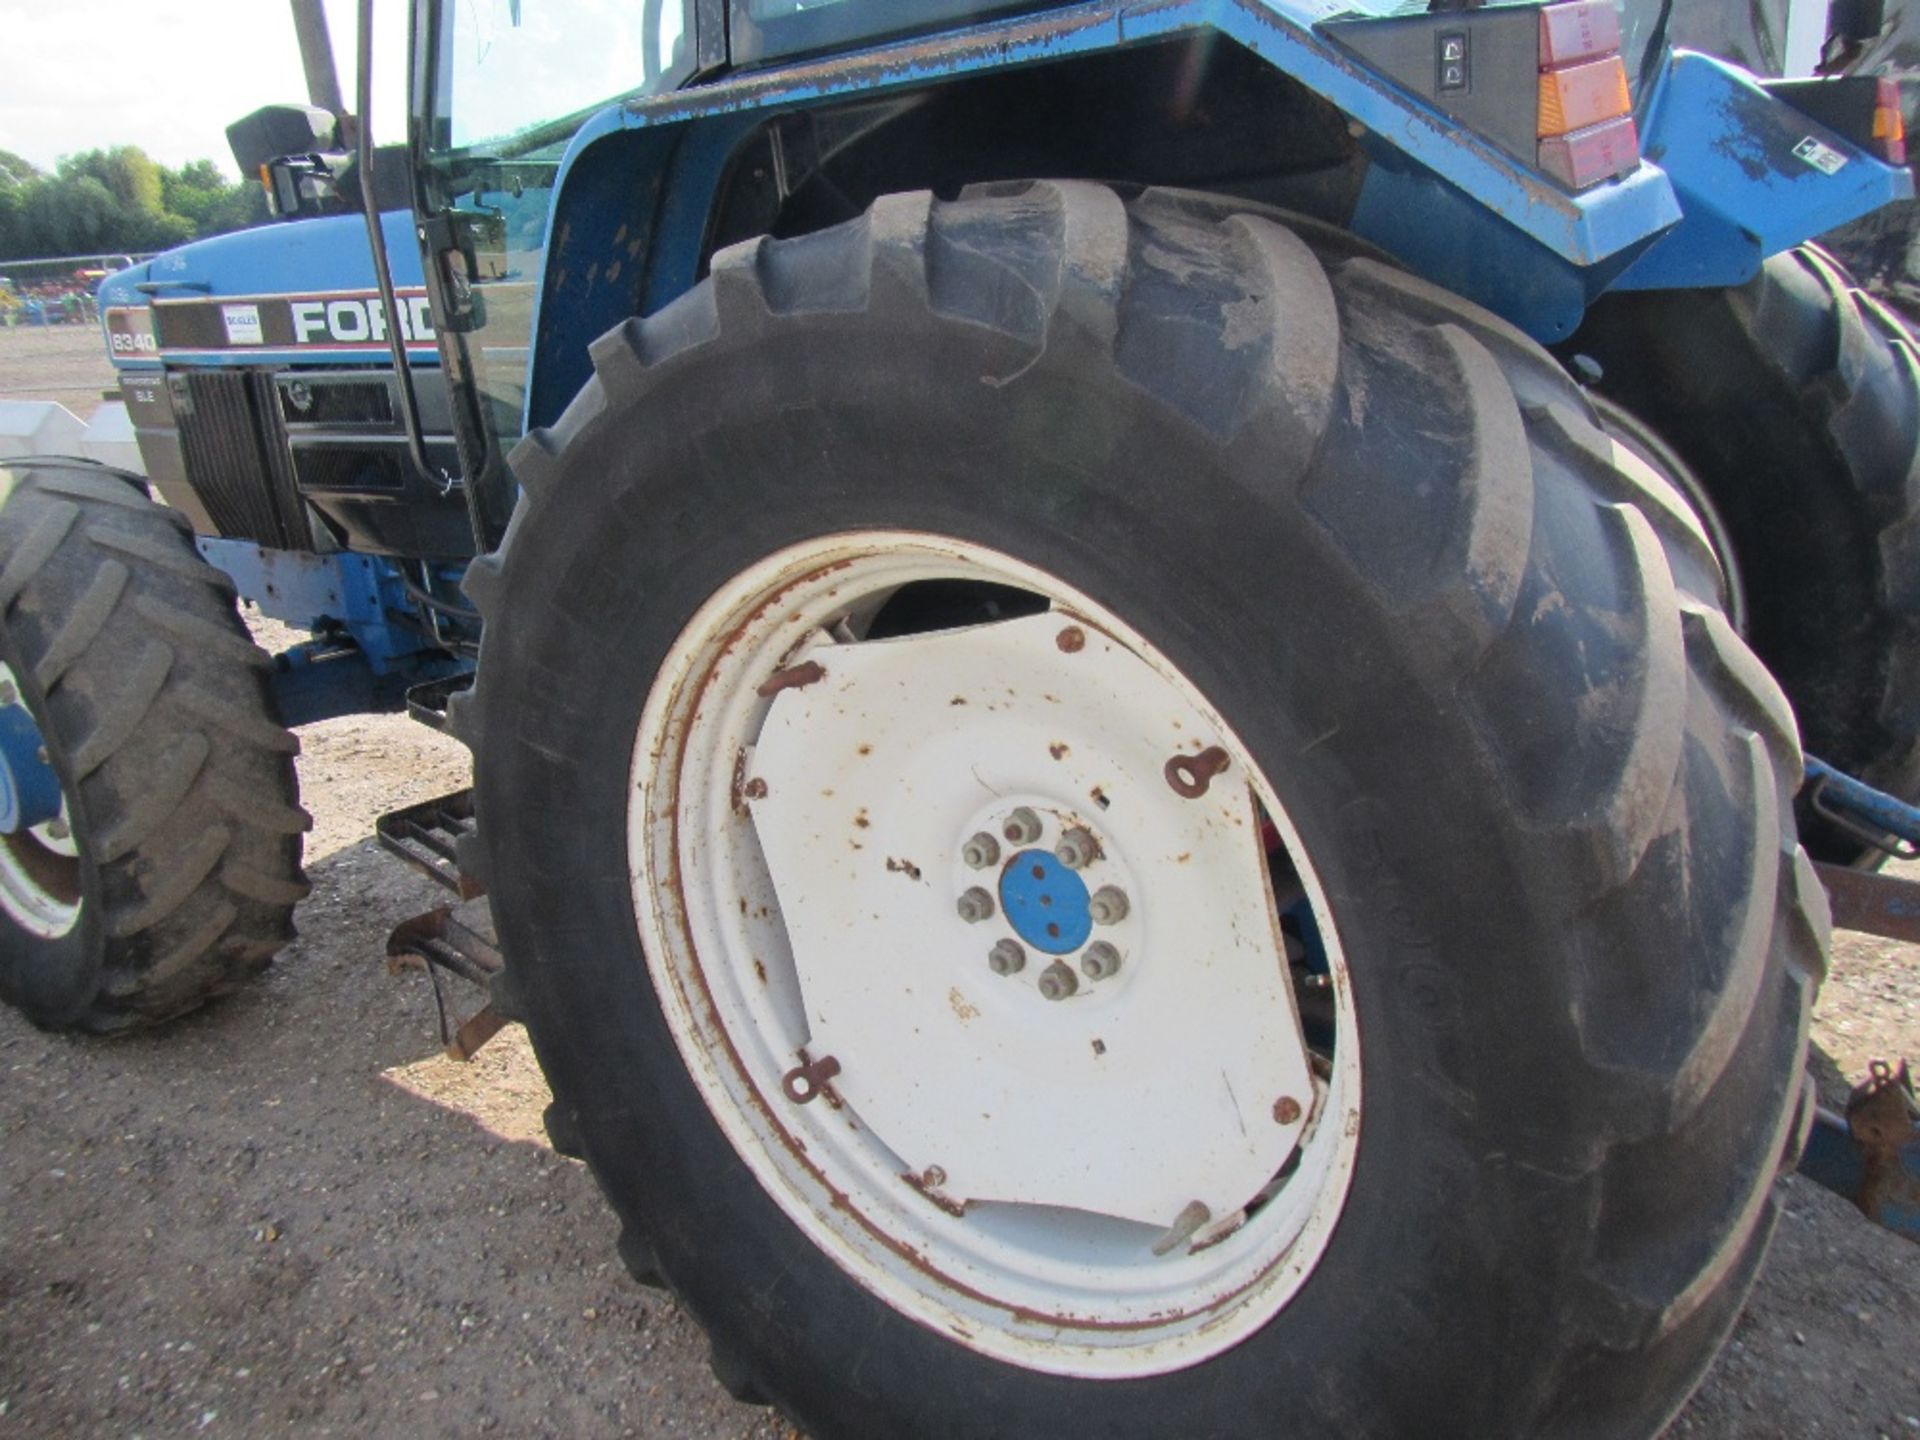 Ford New Holland 8340 SLE 40k Tractor with Air Con. Reg. No. M229 JLJ Ser No BD85370 - Image 10 of 17